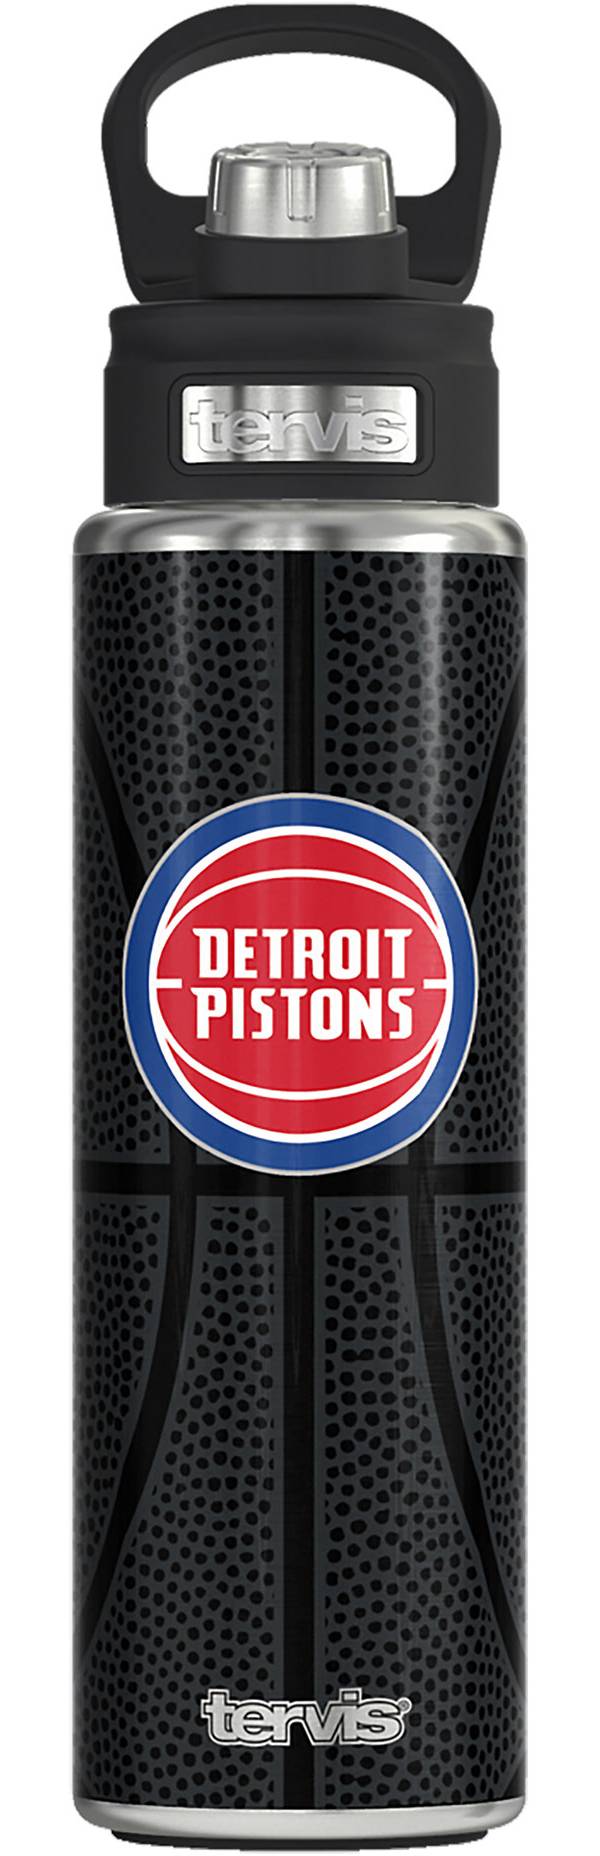 Tervis Detroit Pistons 24oz. Stainless Steel Water Bottle product image